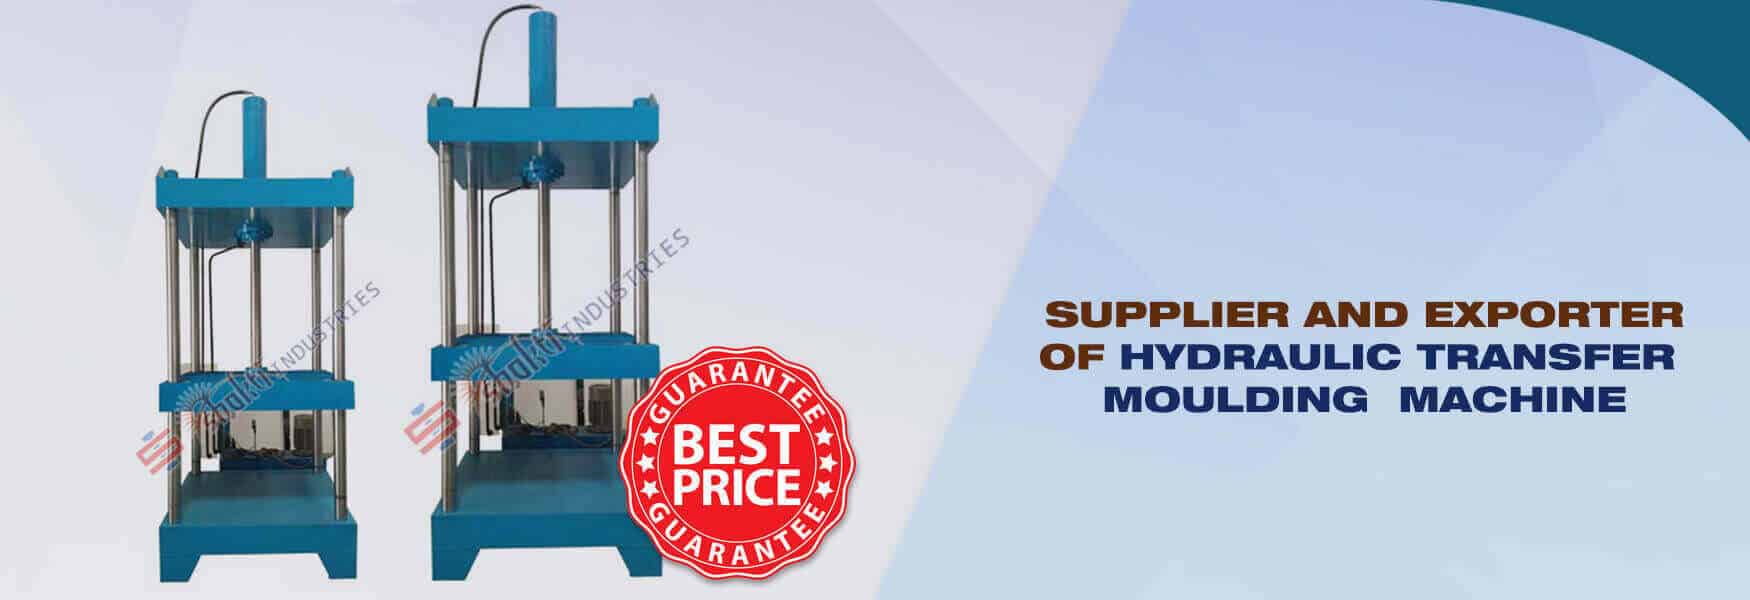 Hydraulic Transfer Moulding Machine Manufacturer, Supplier and Exporter in USA, UK, South-Africa, South-Korea, Kenya, Oman